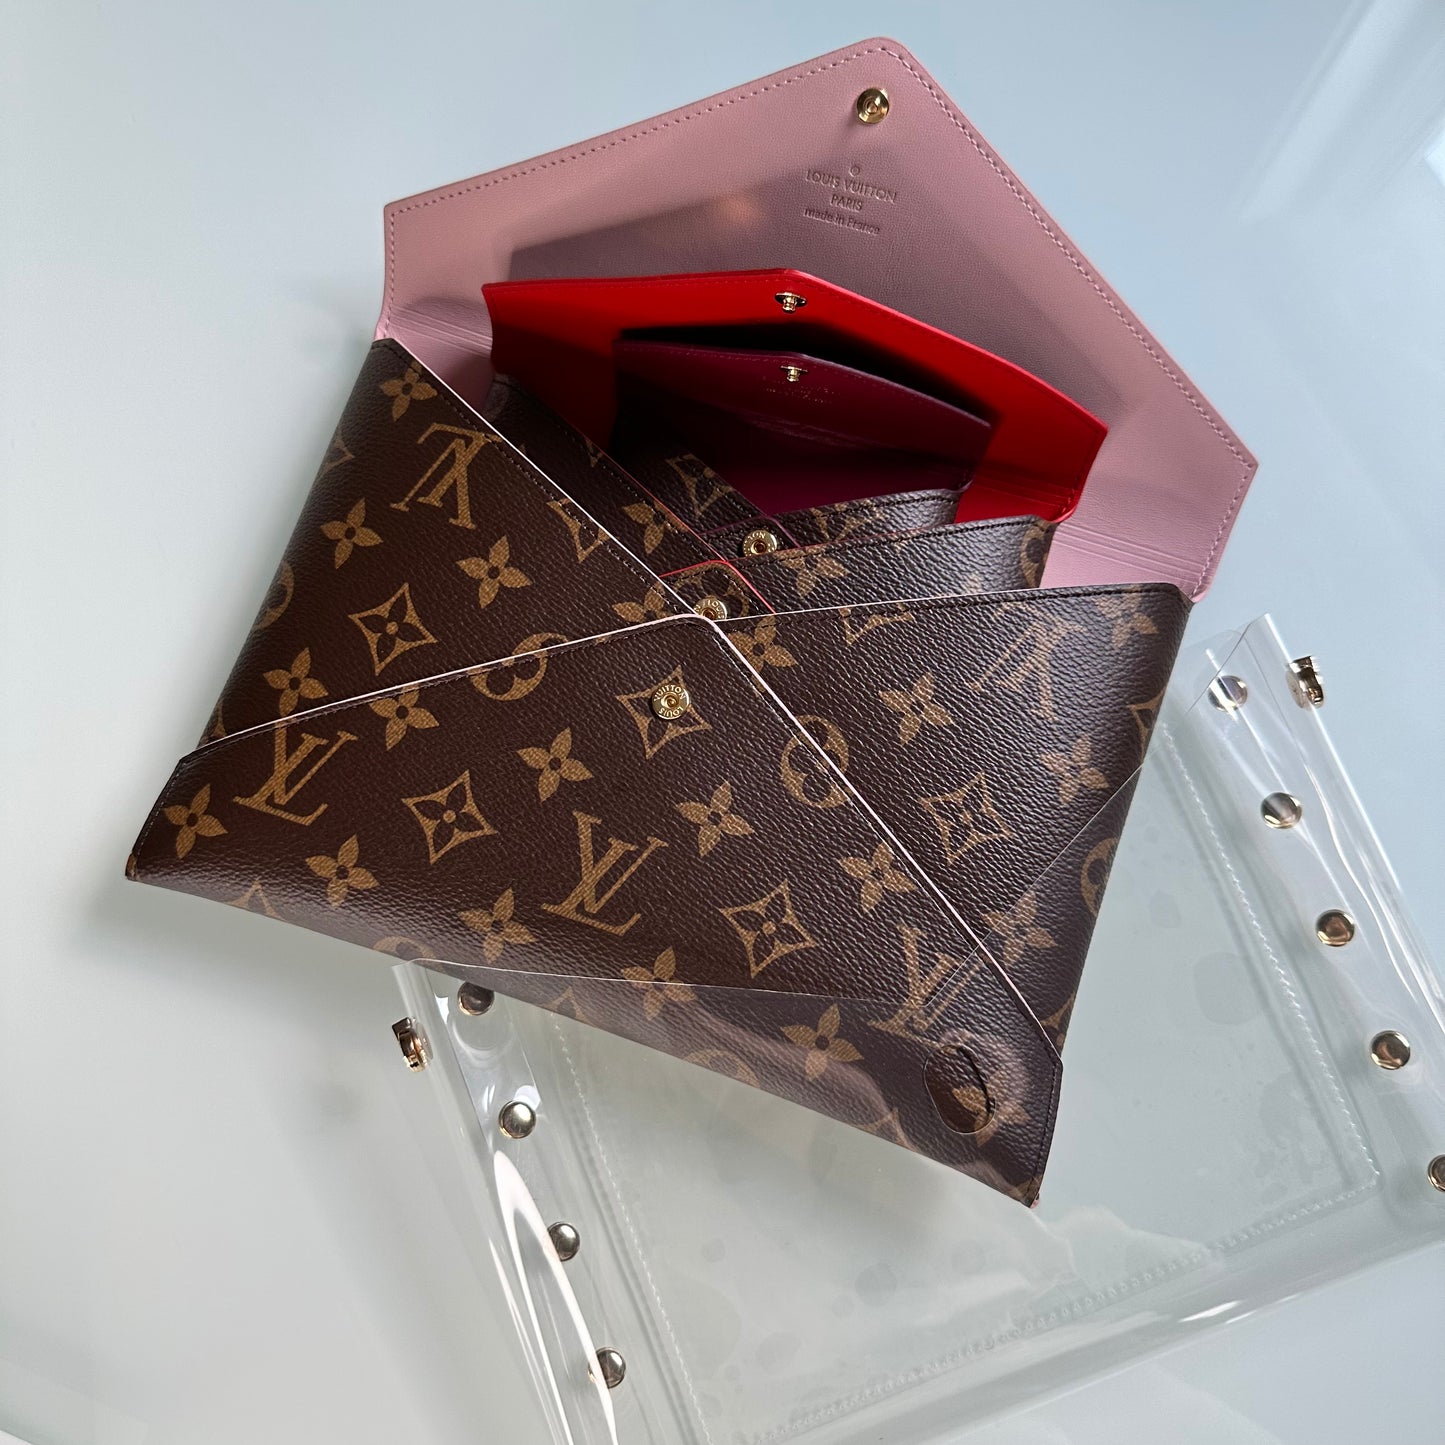 [RM 55.95](▼21%)[No Brand]KIRIGAMI LV Envelope Clutch Felt Insert Clear  Sleeve Chain Sling Leather Strap Convert to Sling